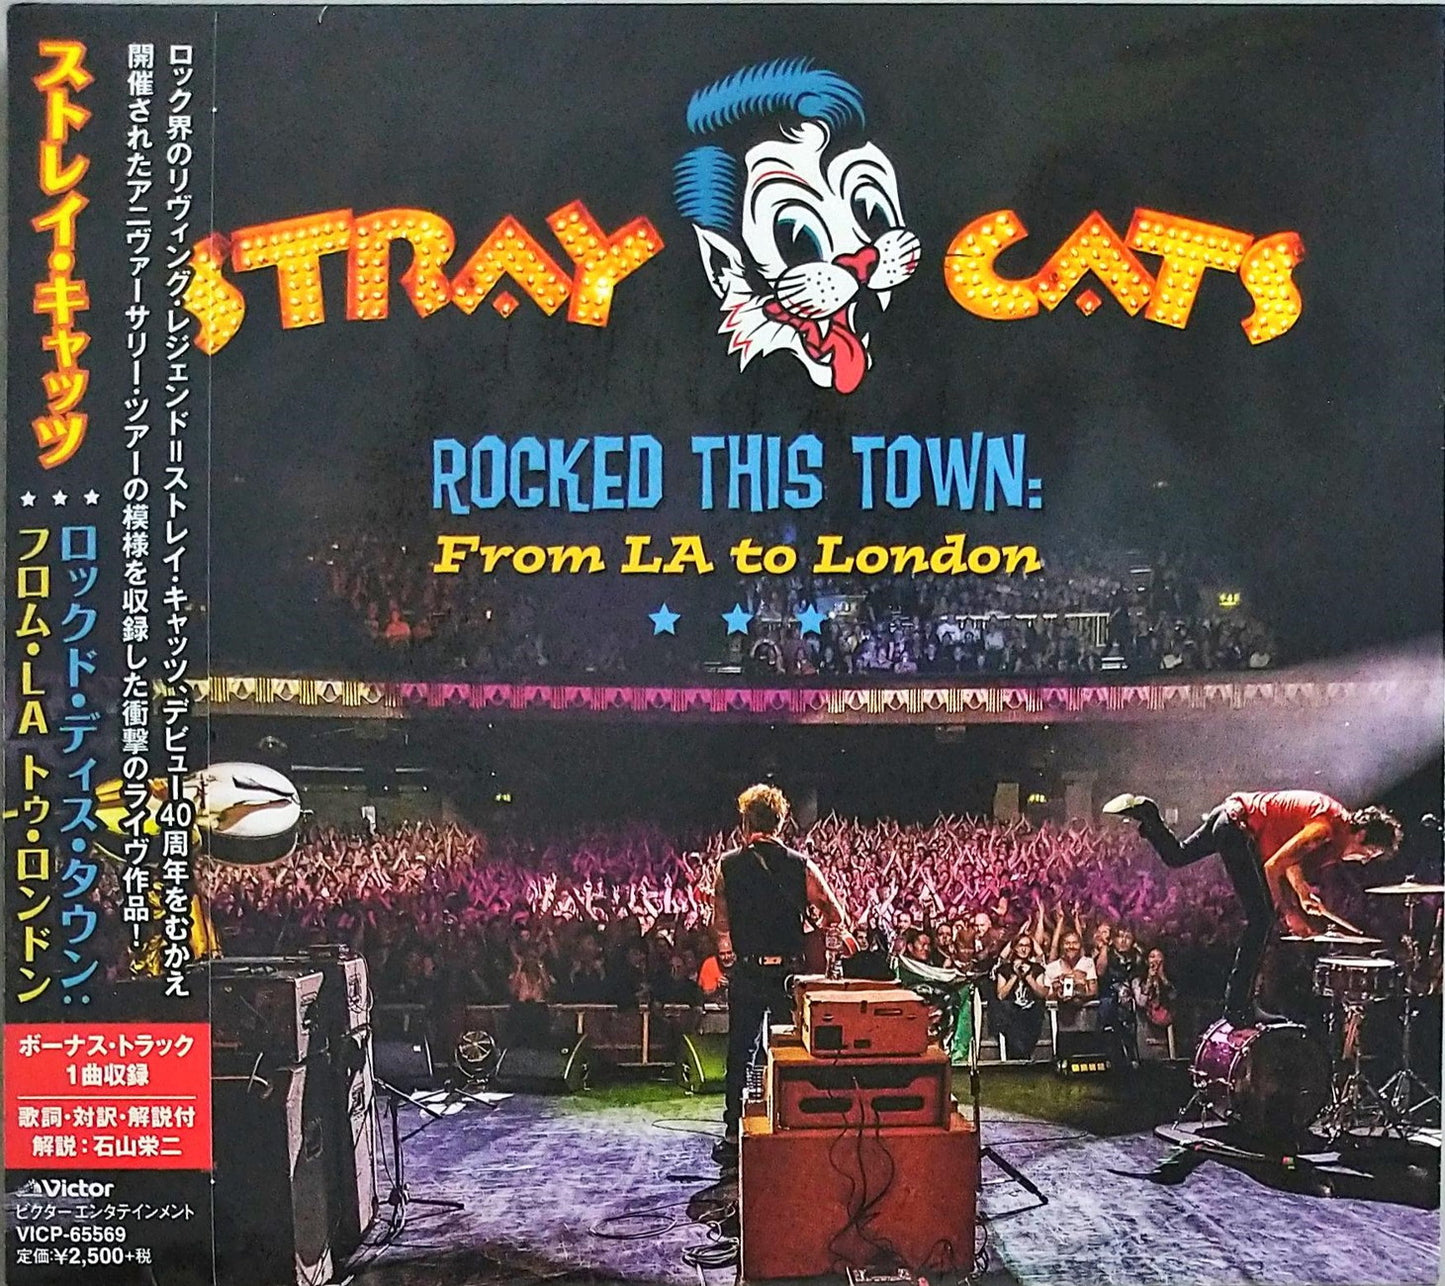 Stray Cats - Rock This Town: From L.A. To London - Japan  CD Bonus Track